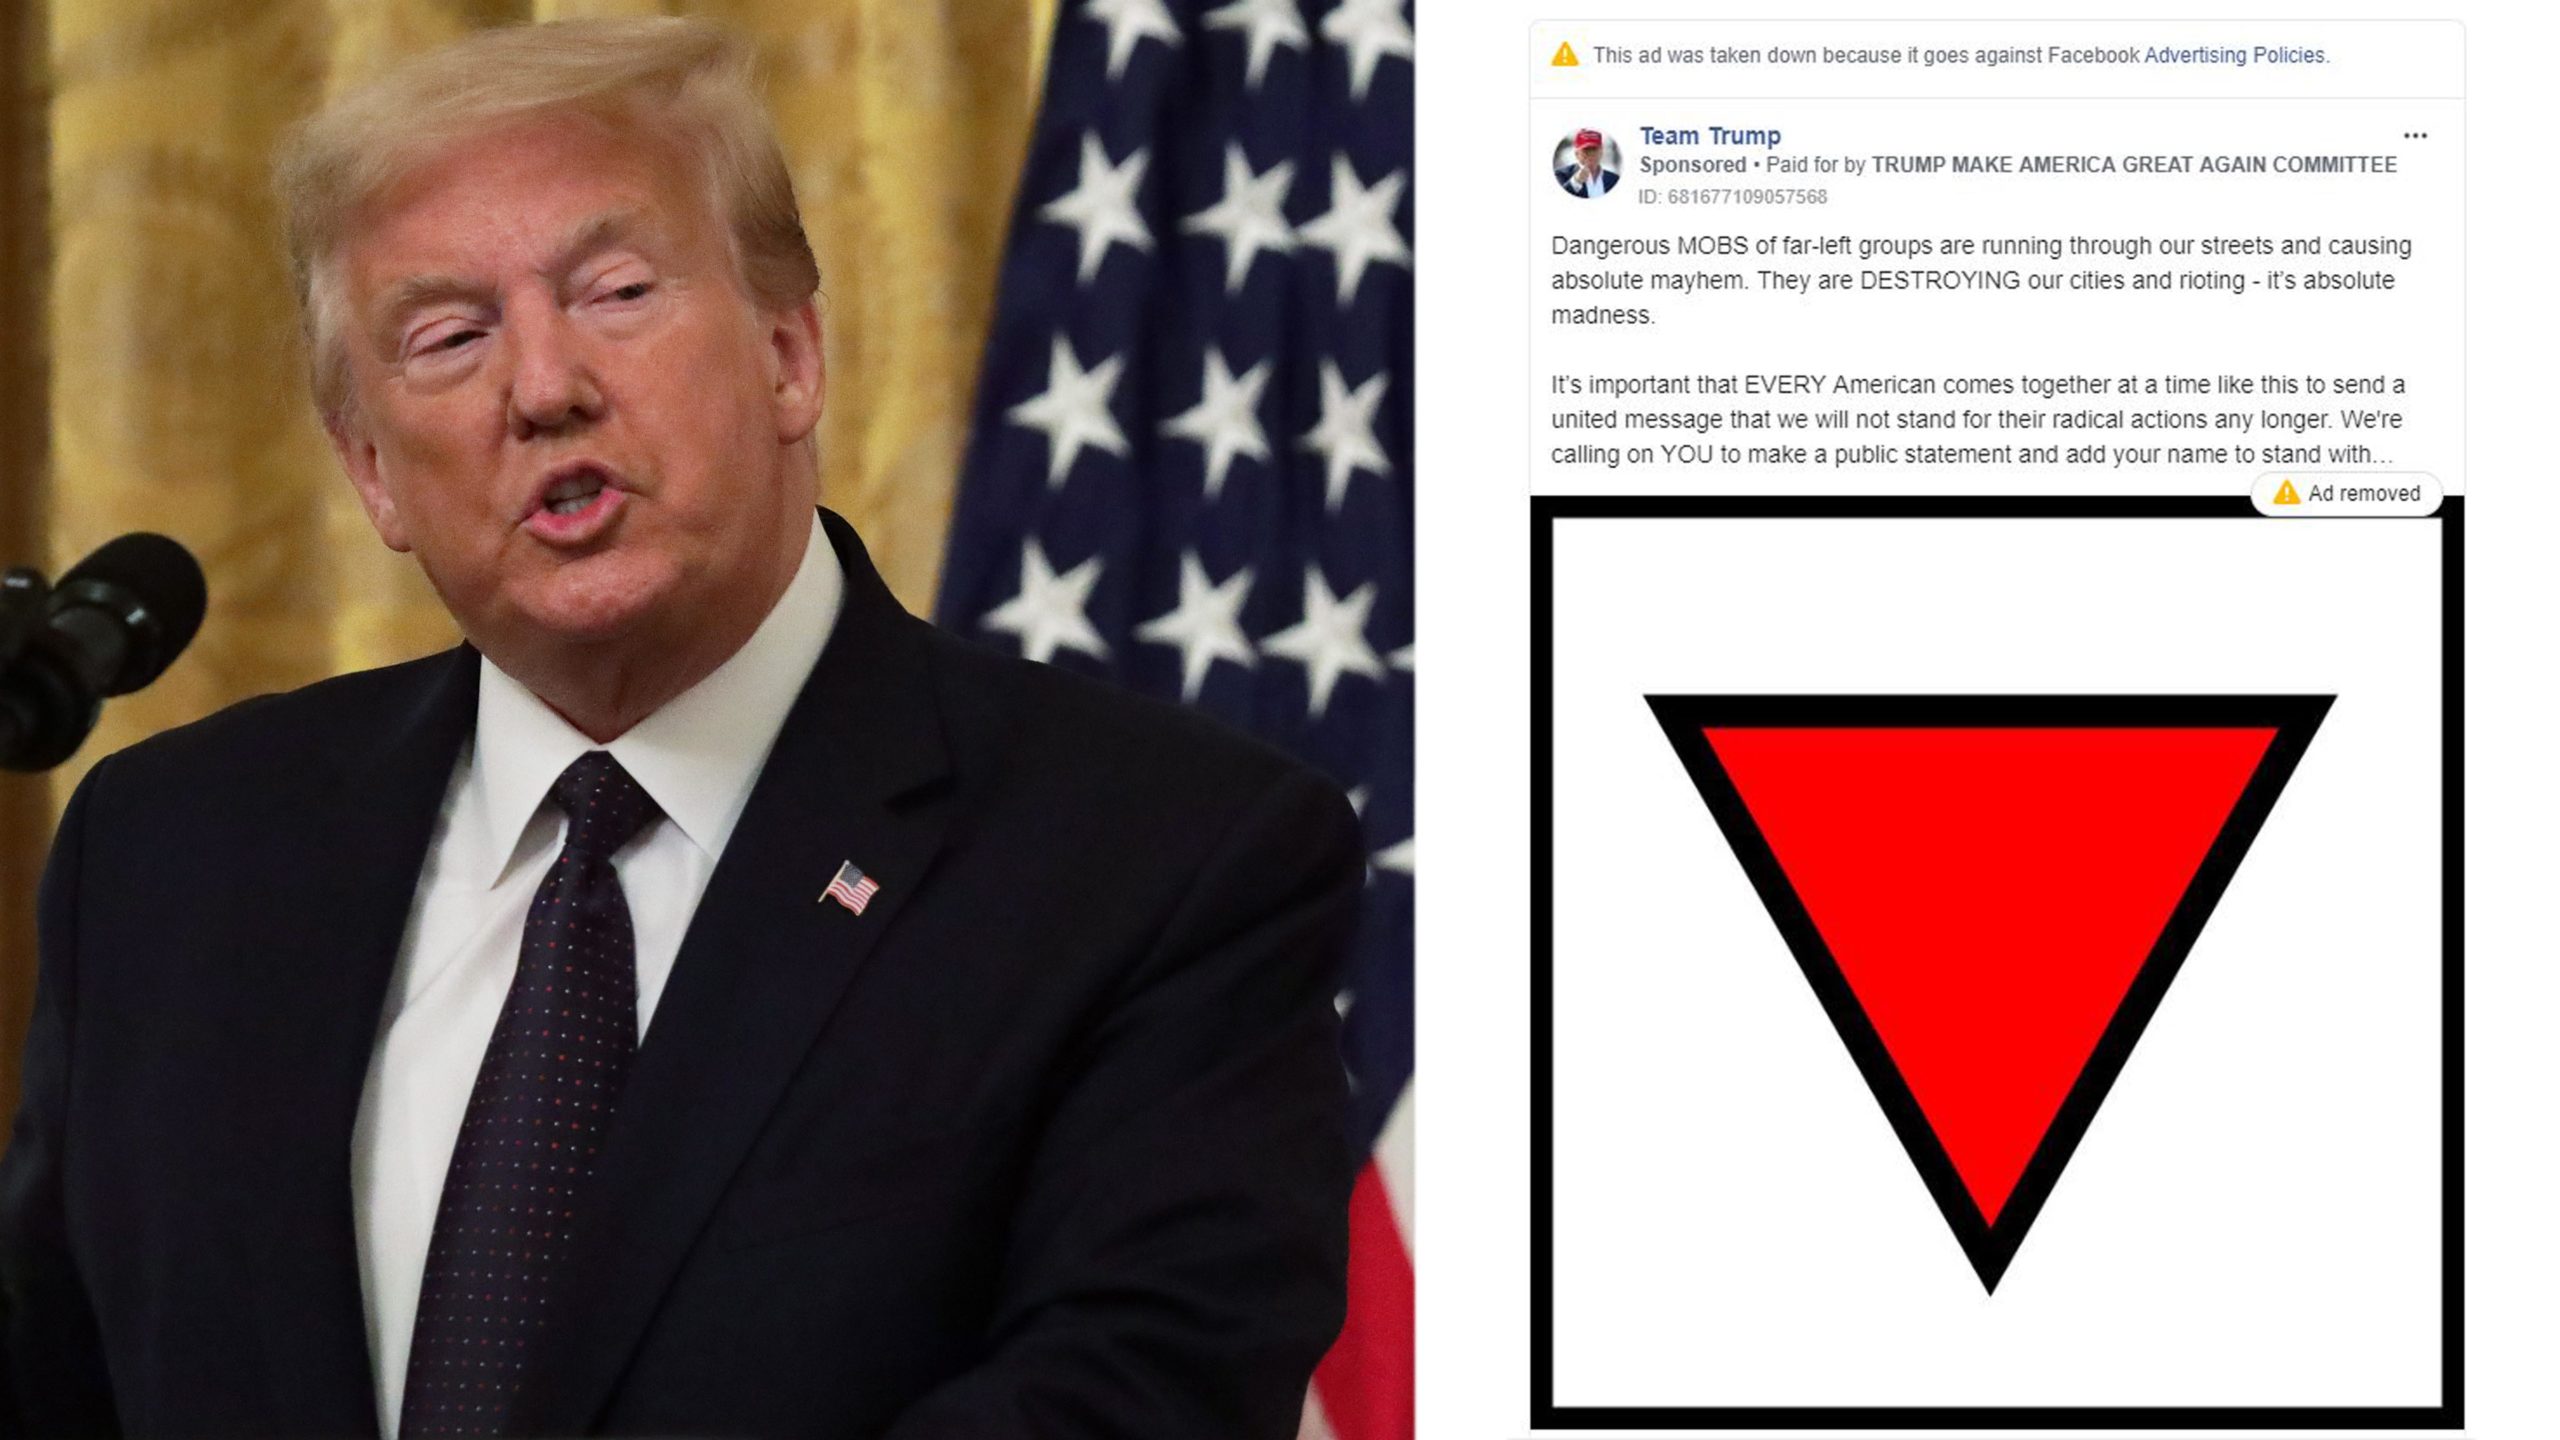 Facebook Removes Trump Ads With Symbol Once Used By Nazis To Designate